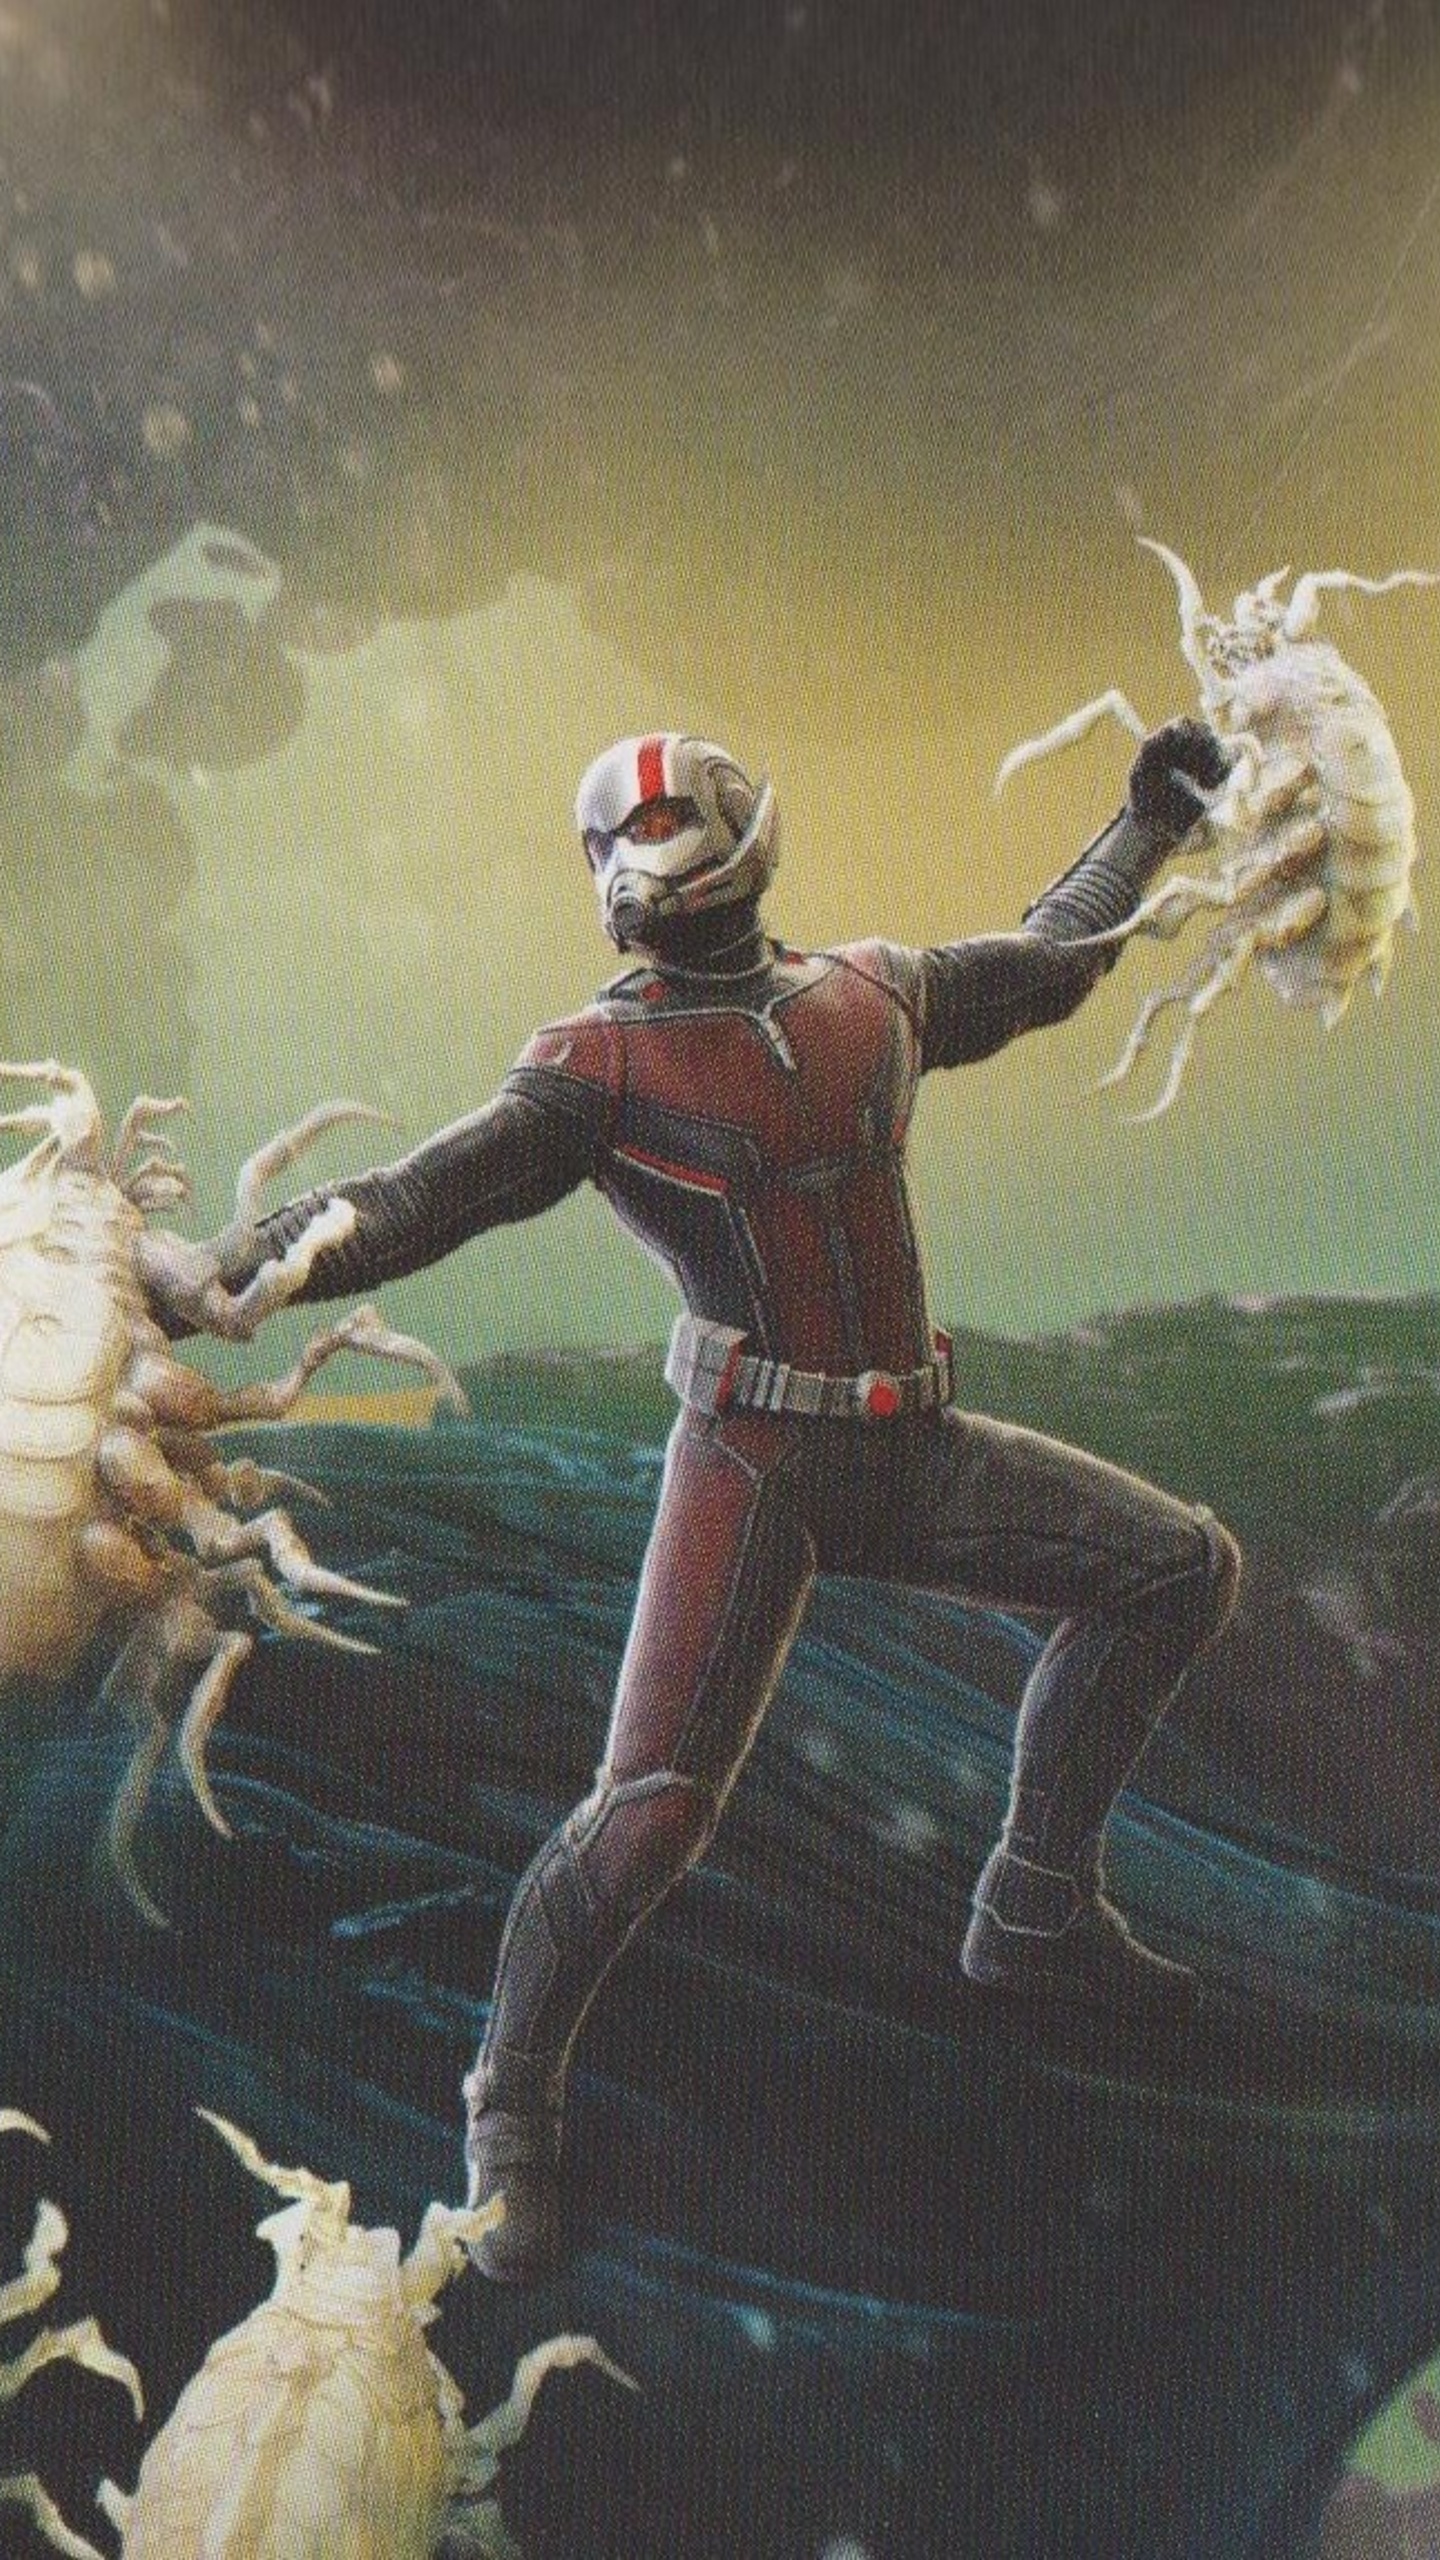 ant-man-and-the-wasp-movie-concept-artwork-yy.jpg